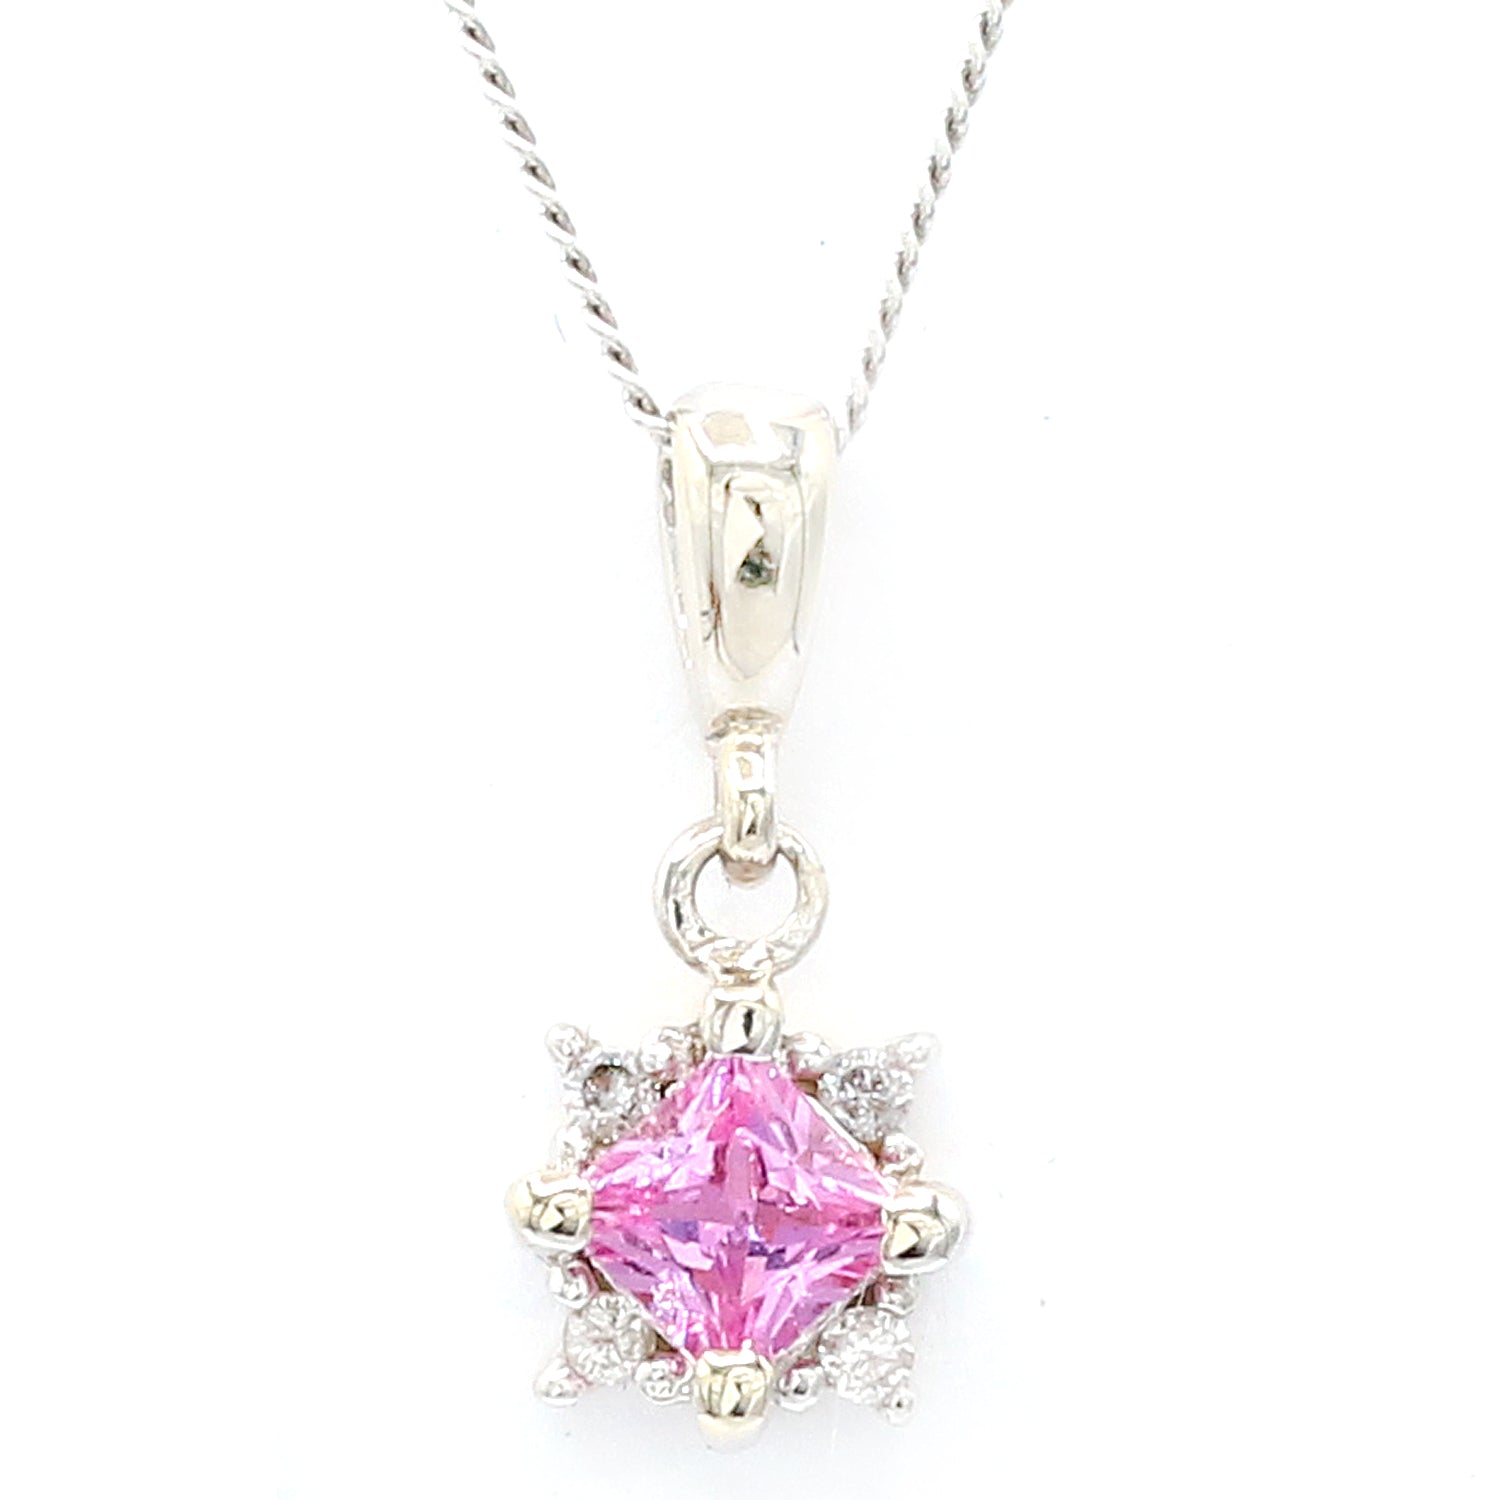 Golden Jewel 14K White Gold Pink Sapphire & Diamond Pendant on 16" cable link chain